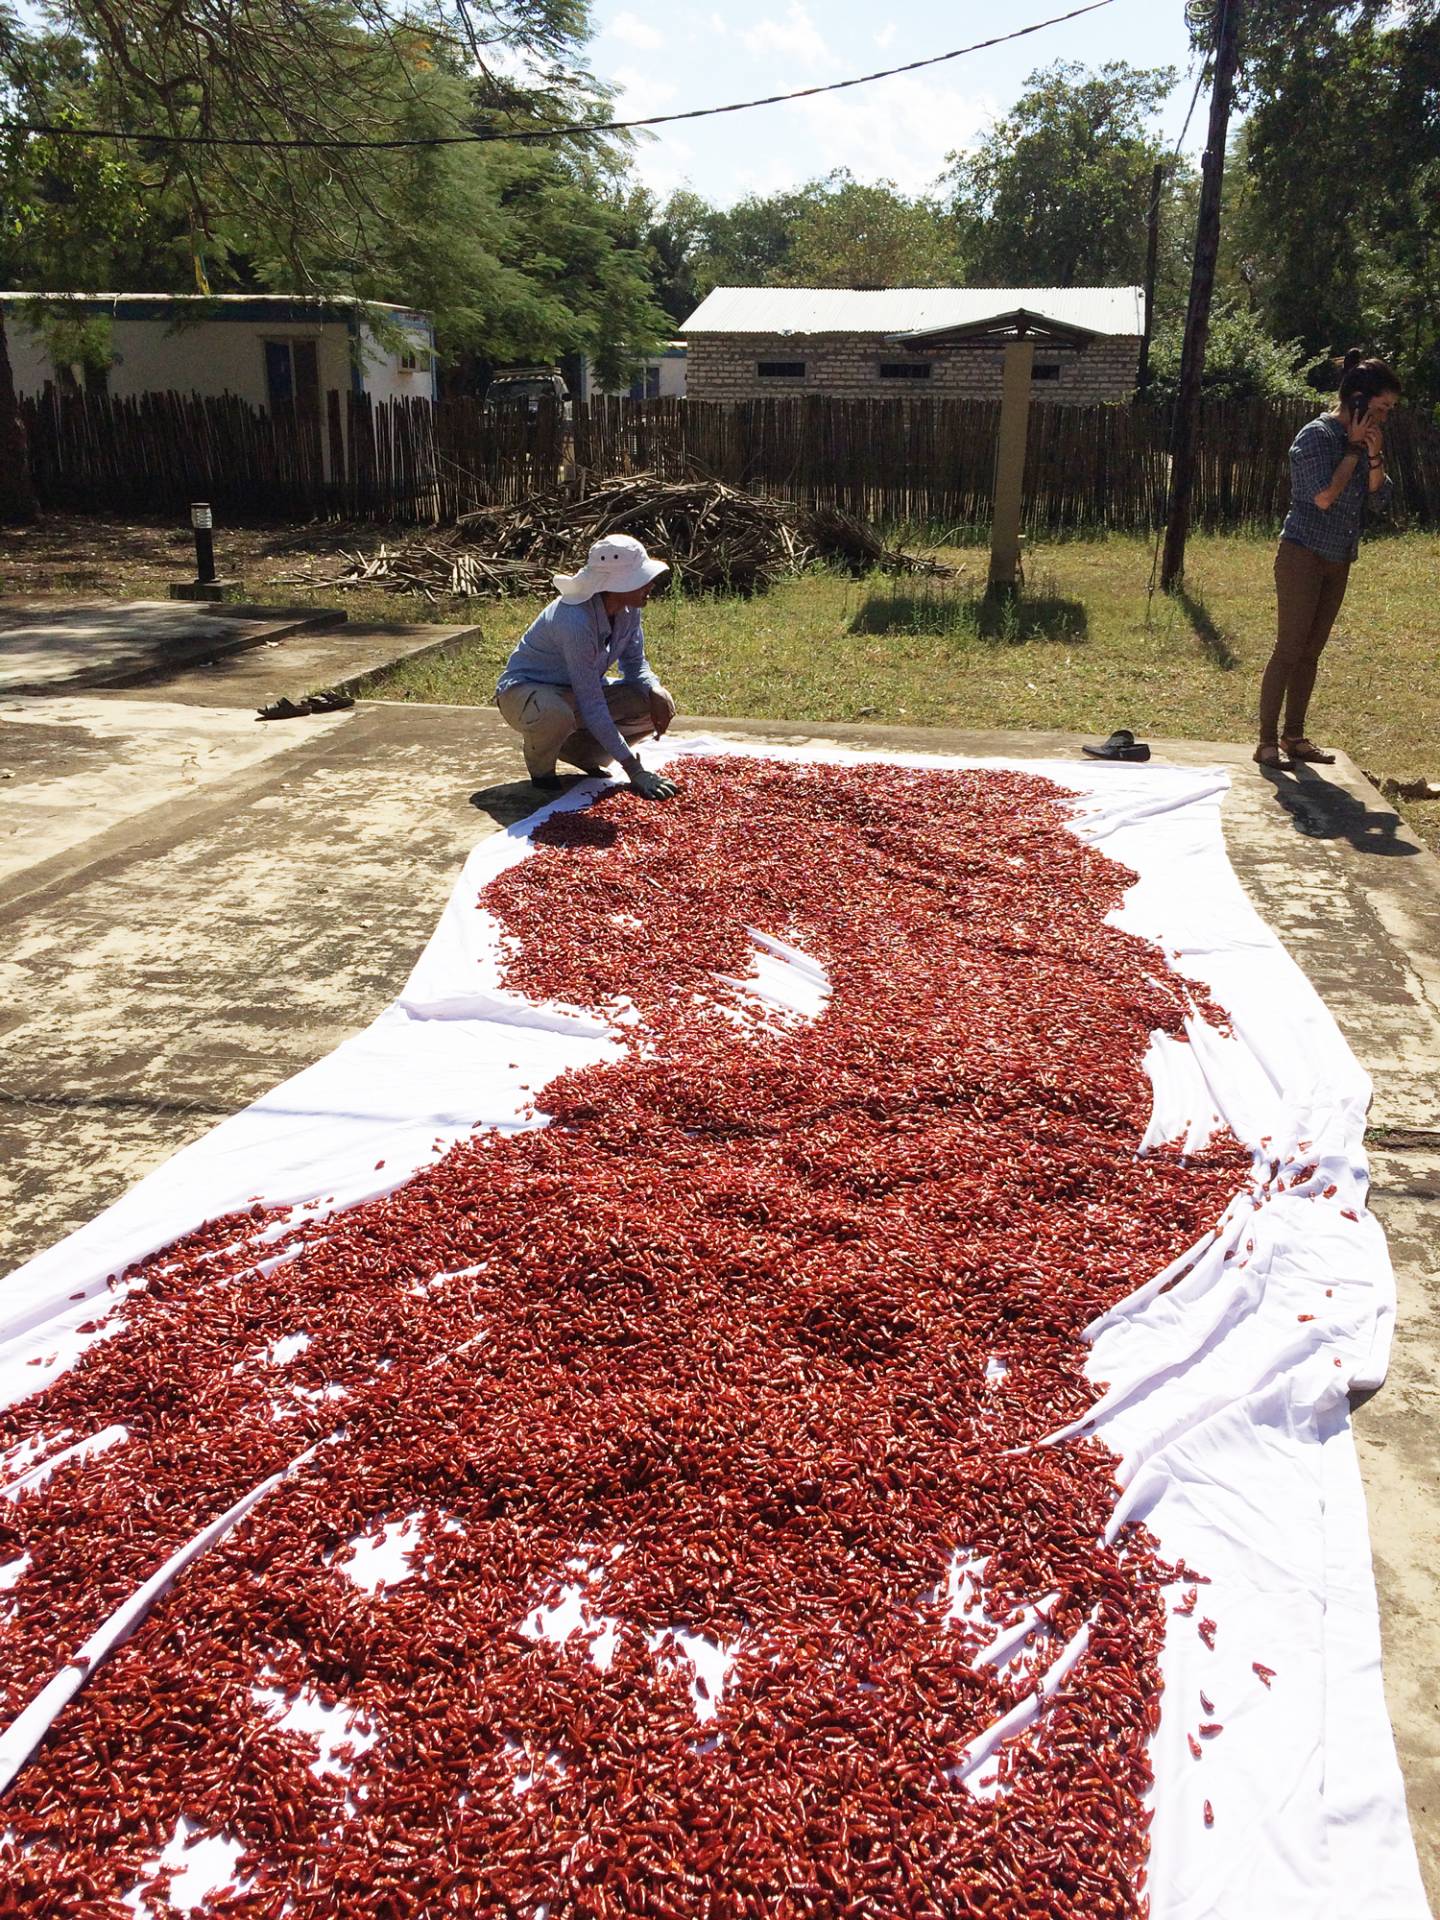 A tarp covered in chili papers is laid out